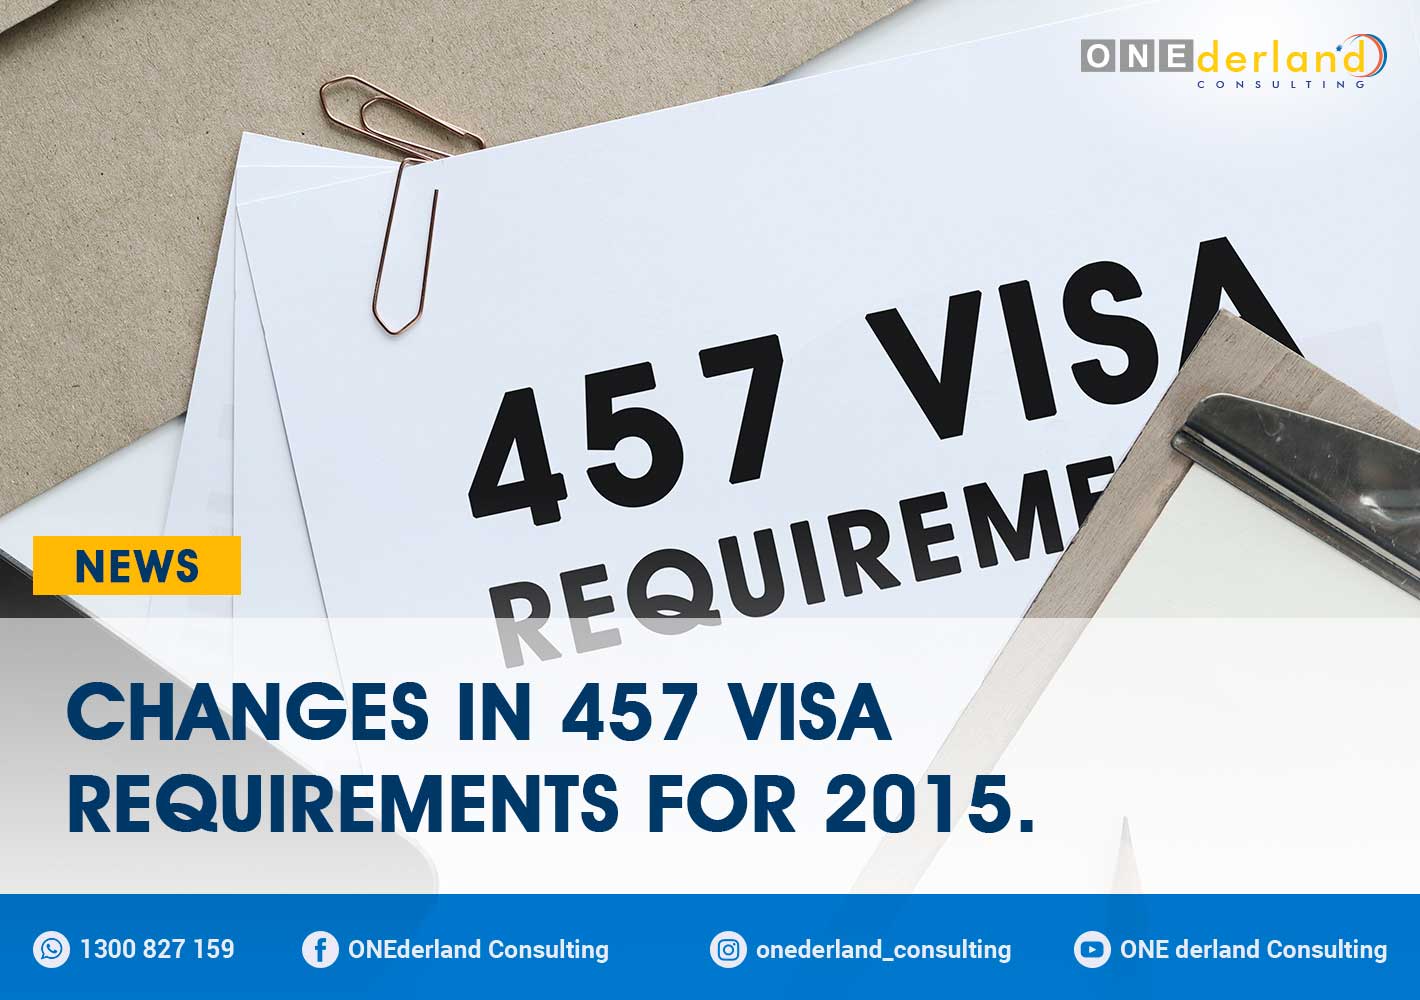 Changes to 457 Visa